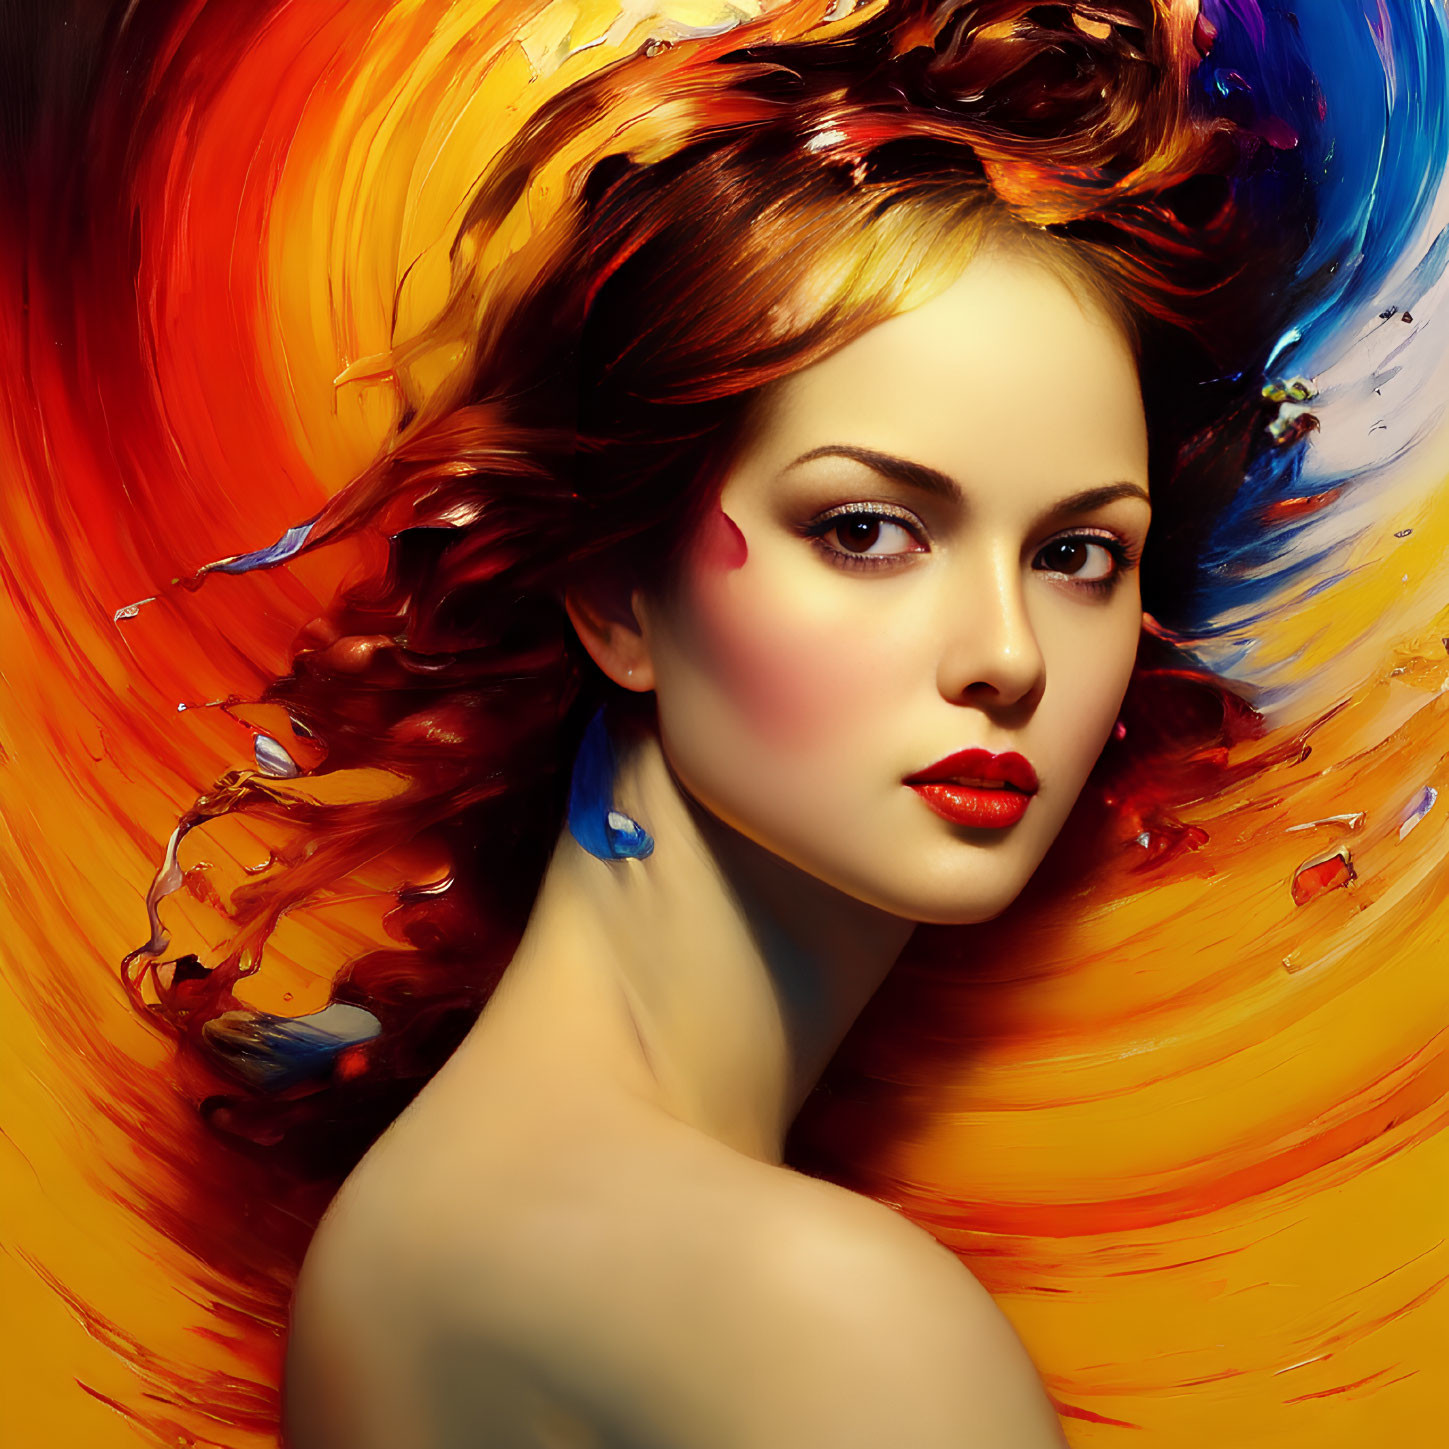 Colorful digital portrait of a woman with flowing hair in fiery orange and vivid blue tones.